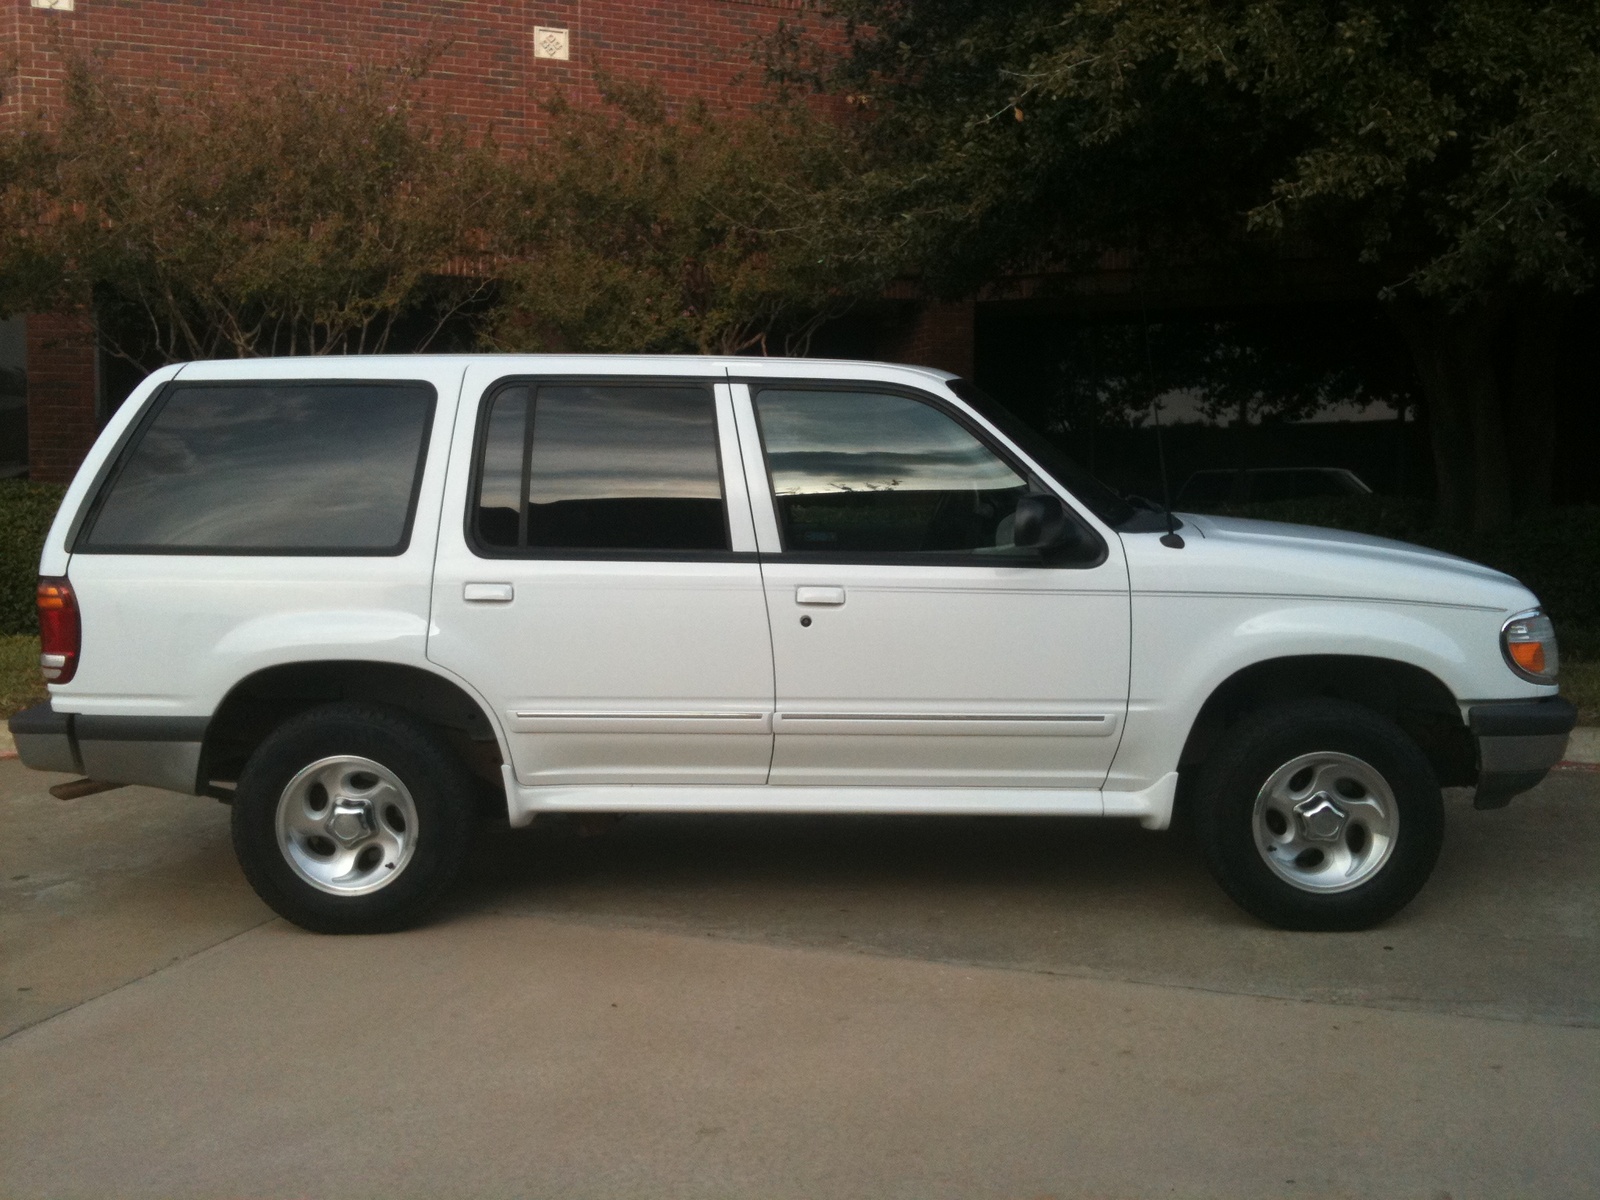 1998 Ford explorer limited review